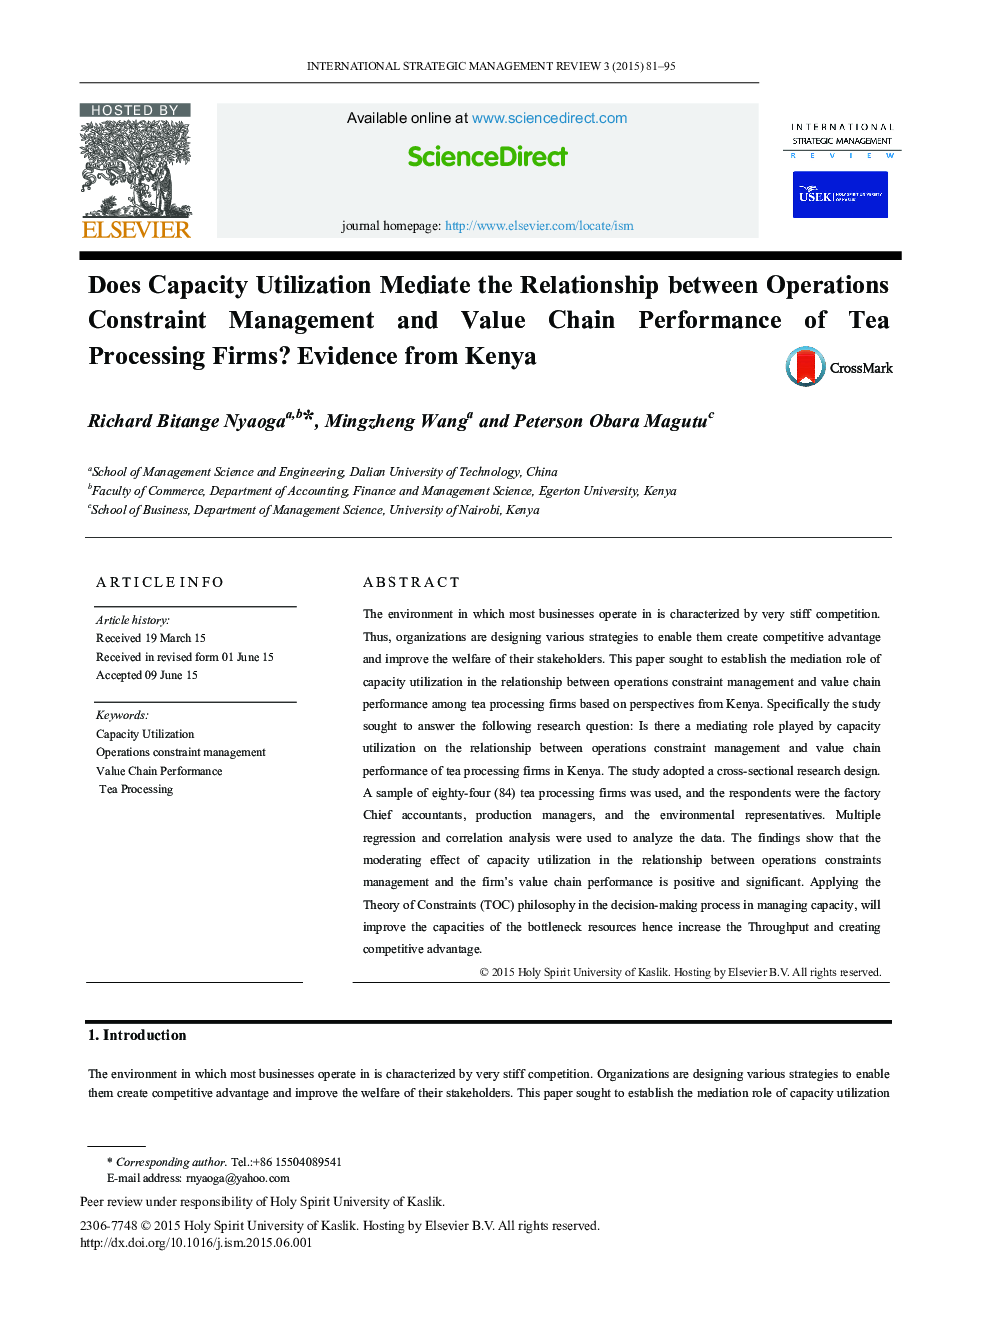 Does Capacity Utilization Mediate the Relationship between Operations Constraint Management and Value Chain Performance of Tea Processing Firms? Evidence from Kenya